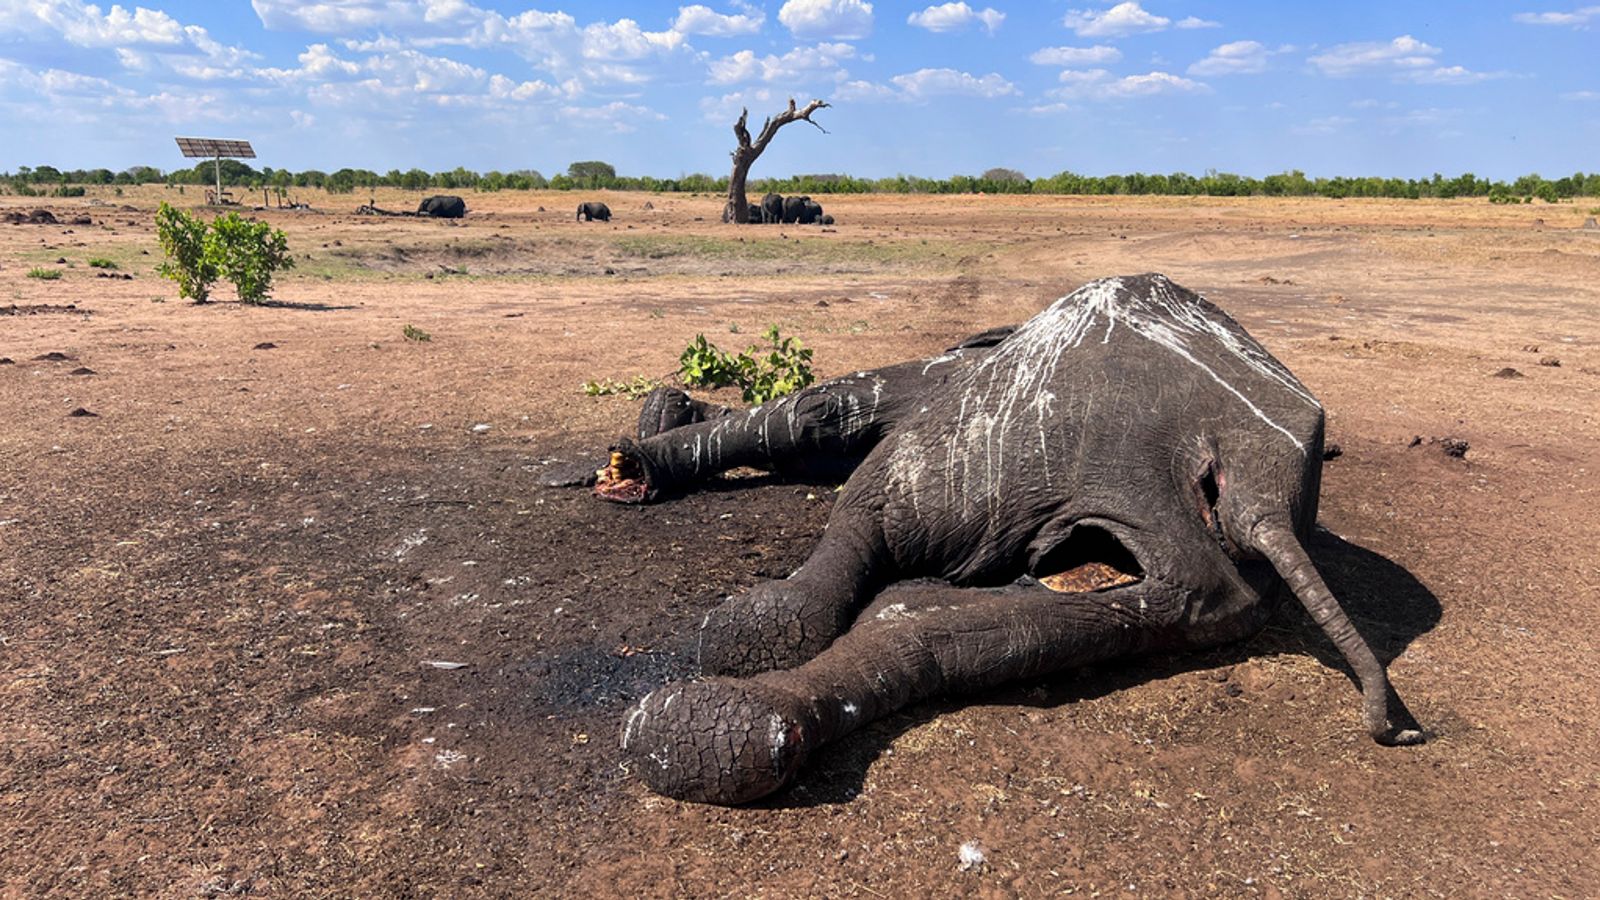 Zimbabwe: At least 100 elephants die in national park amid drought